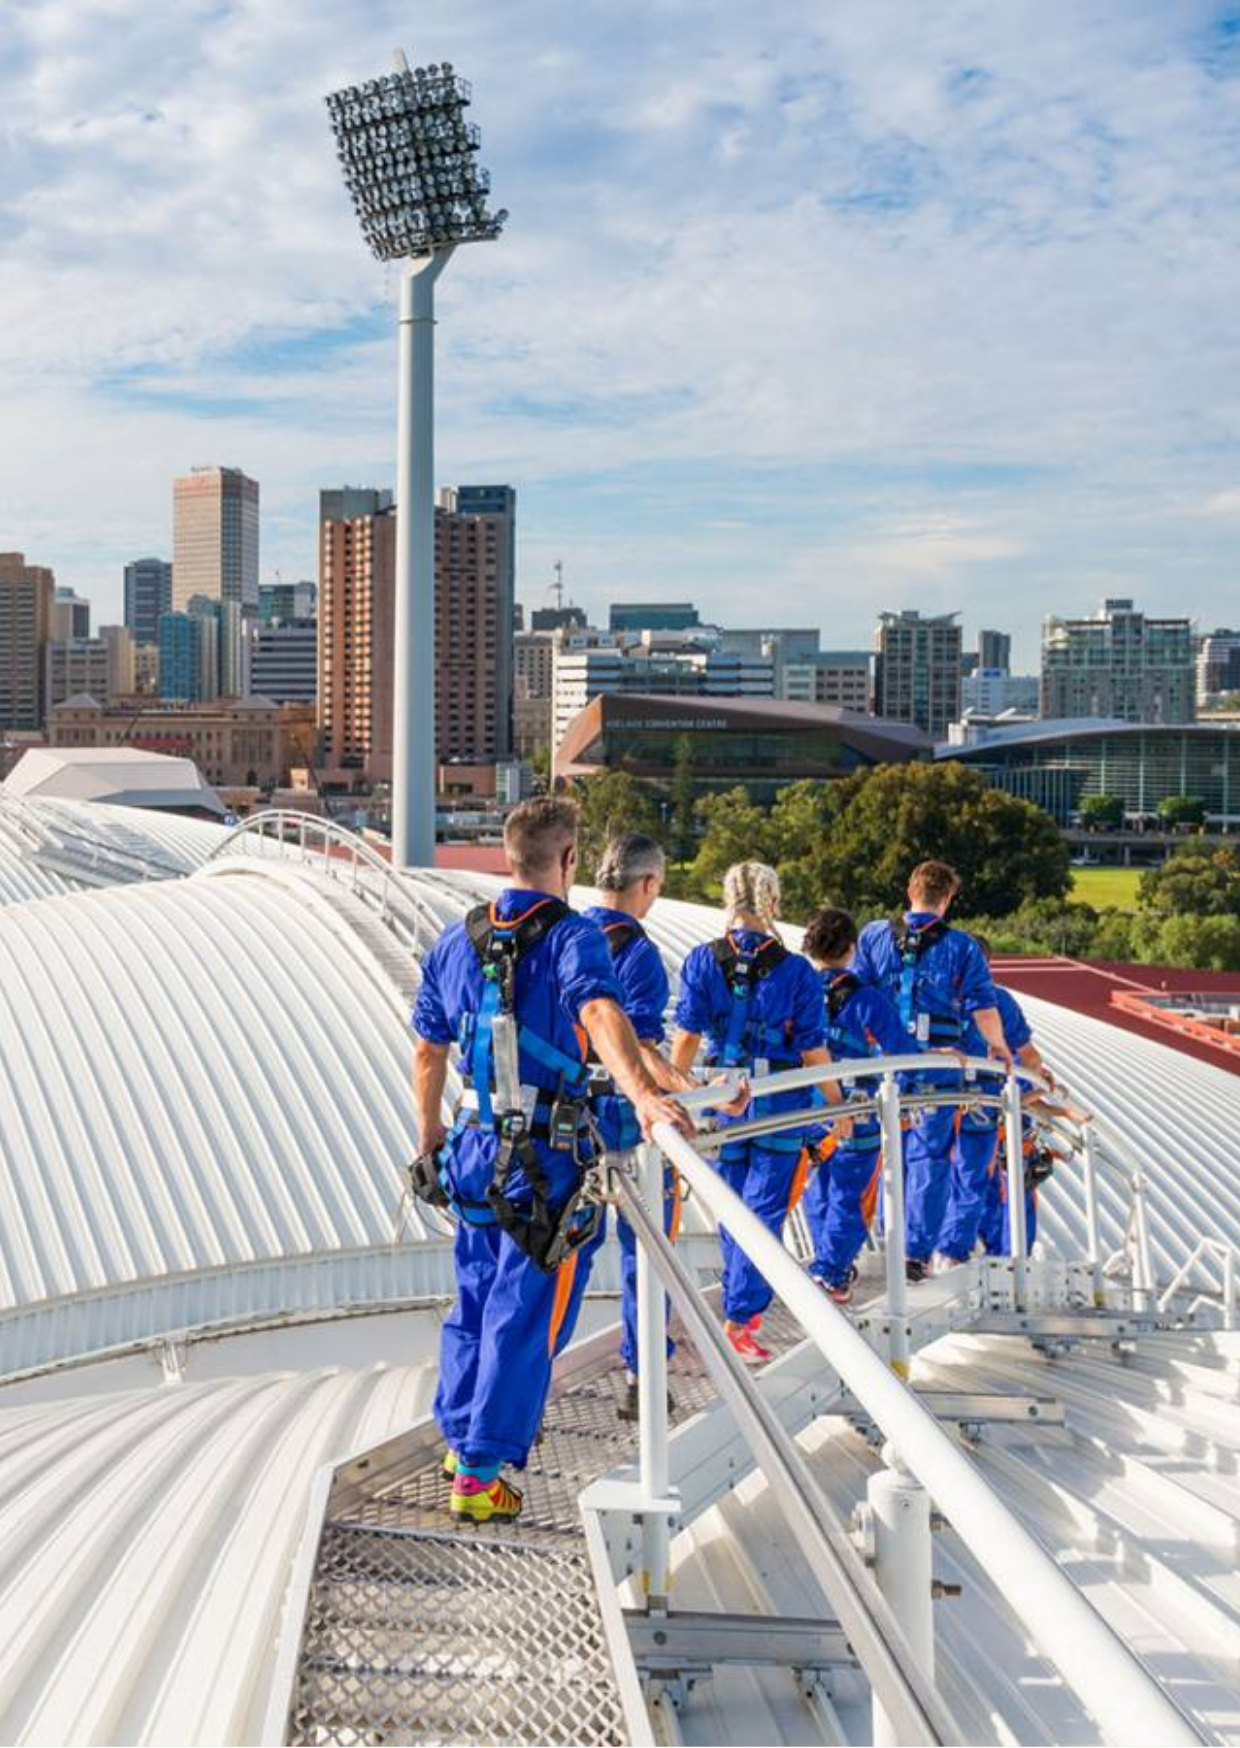 ROOFCLIMB Adelaide Oval: Things to do in Adelaide Australia.